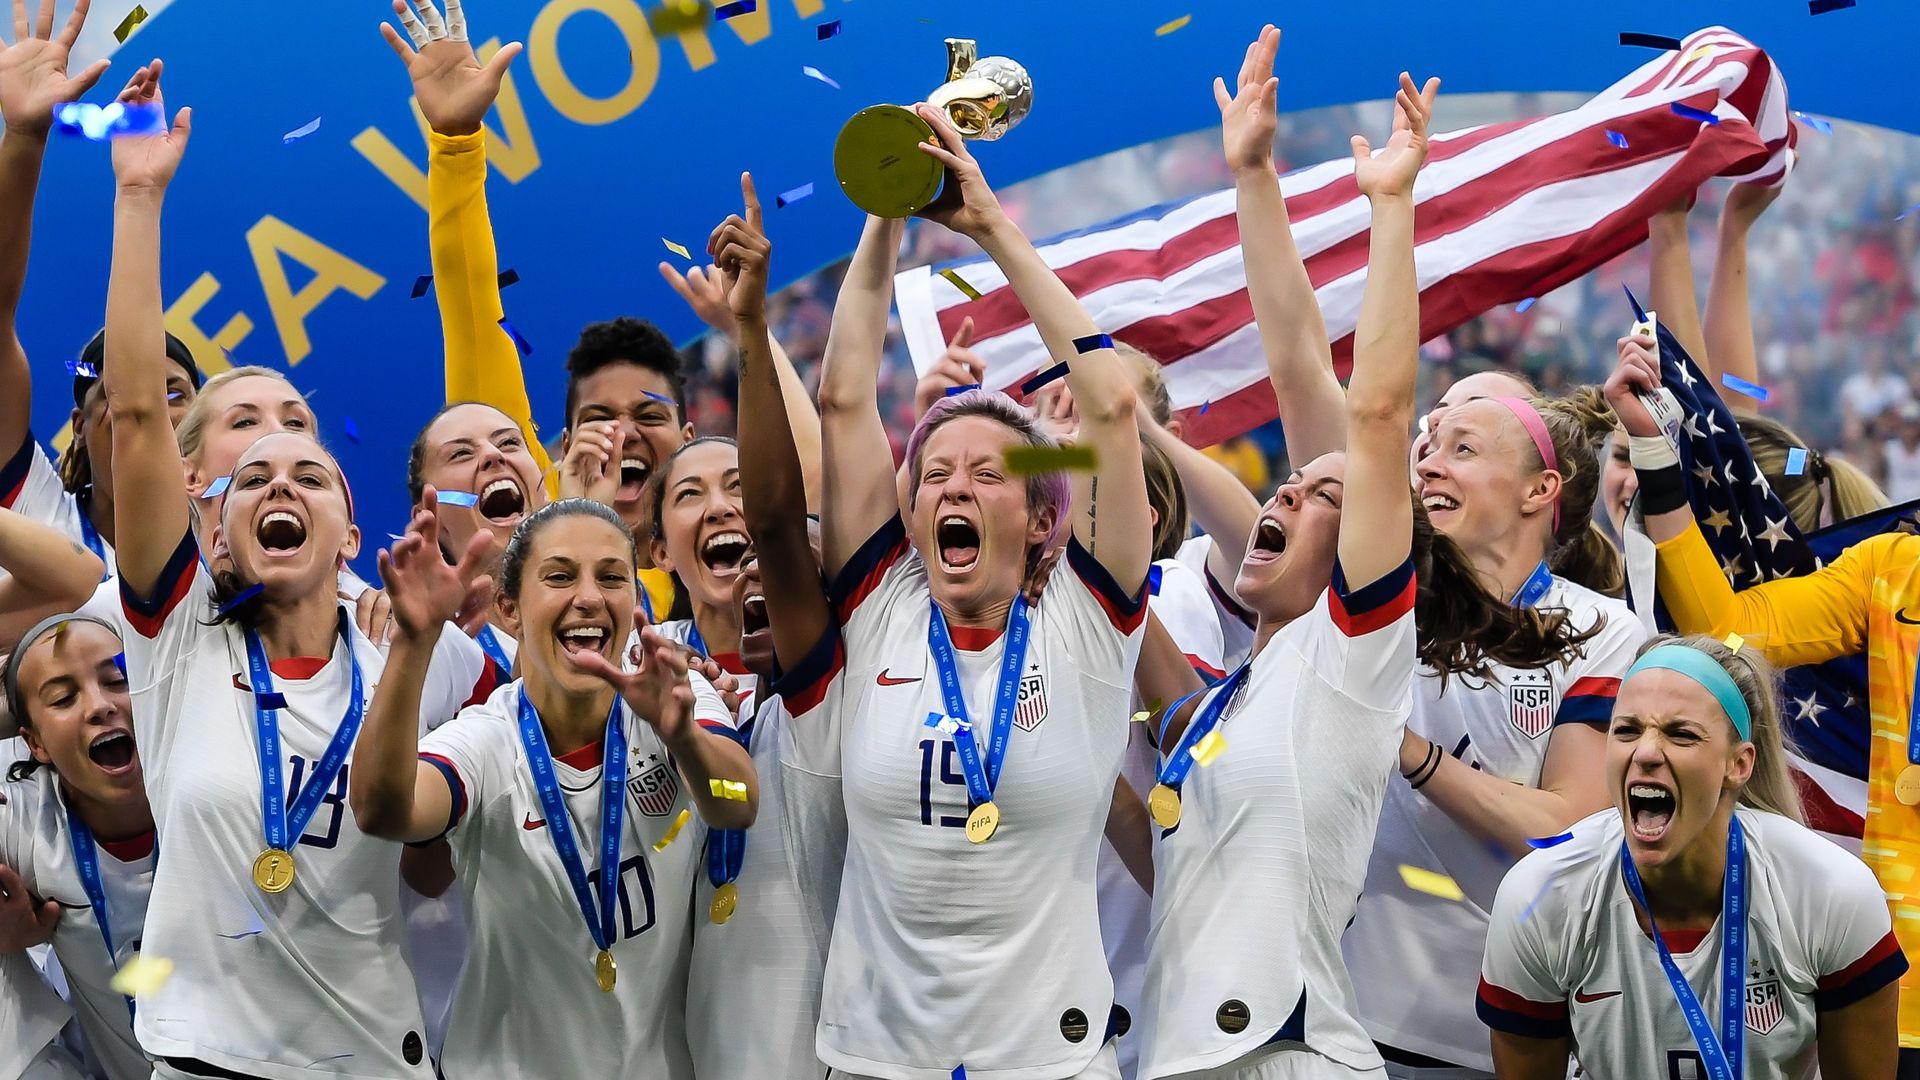 2023 World Cup: FIFA increases prize money for women, but still